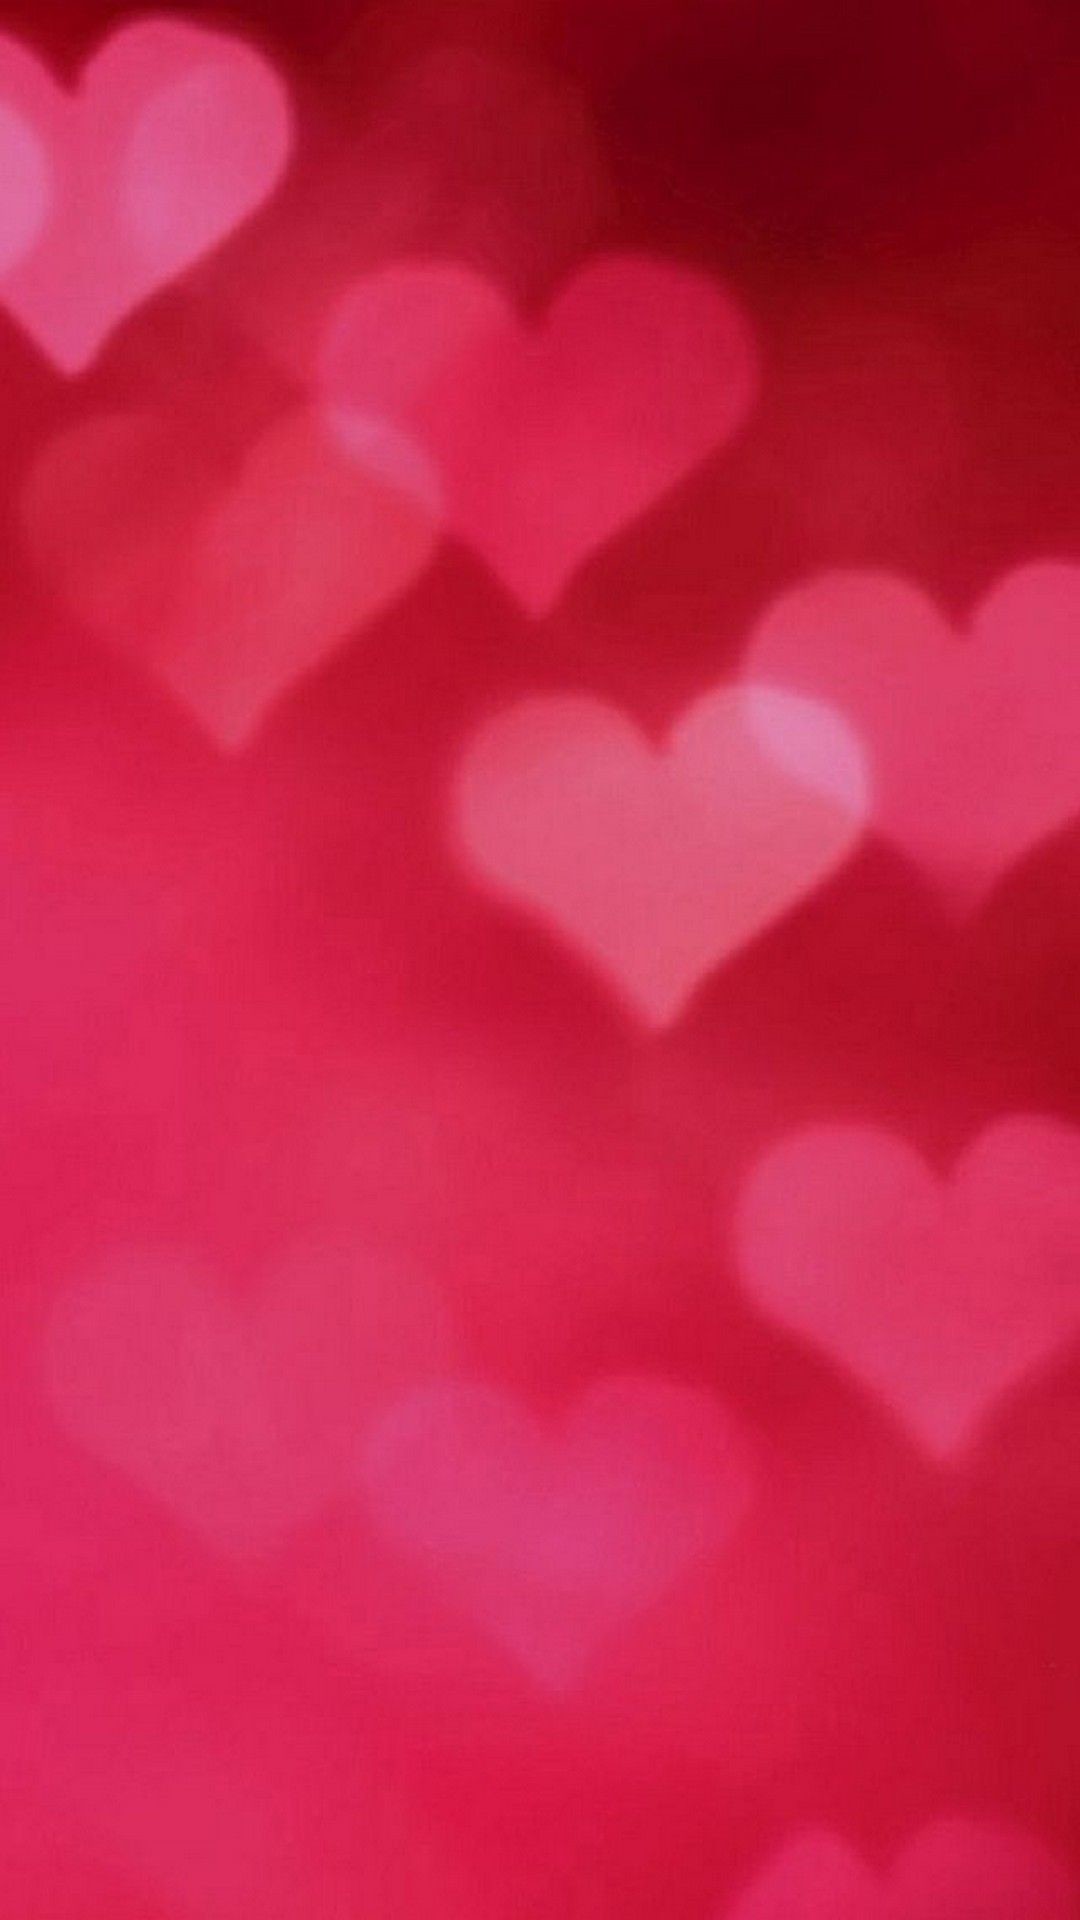 1080x1920 736x1377 Cute Valentine iPhone Wallpapers Free To Download">